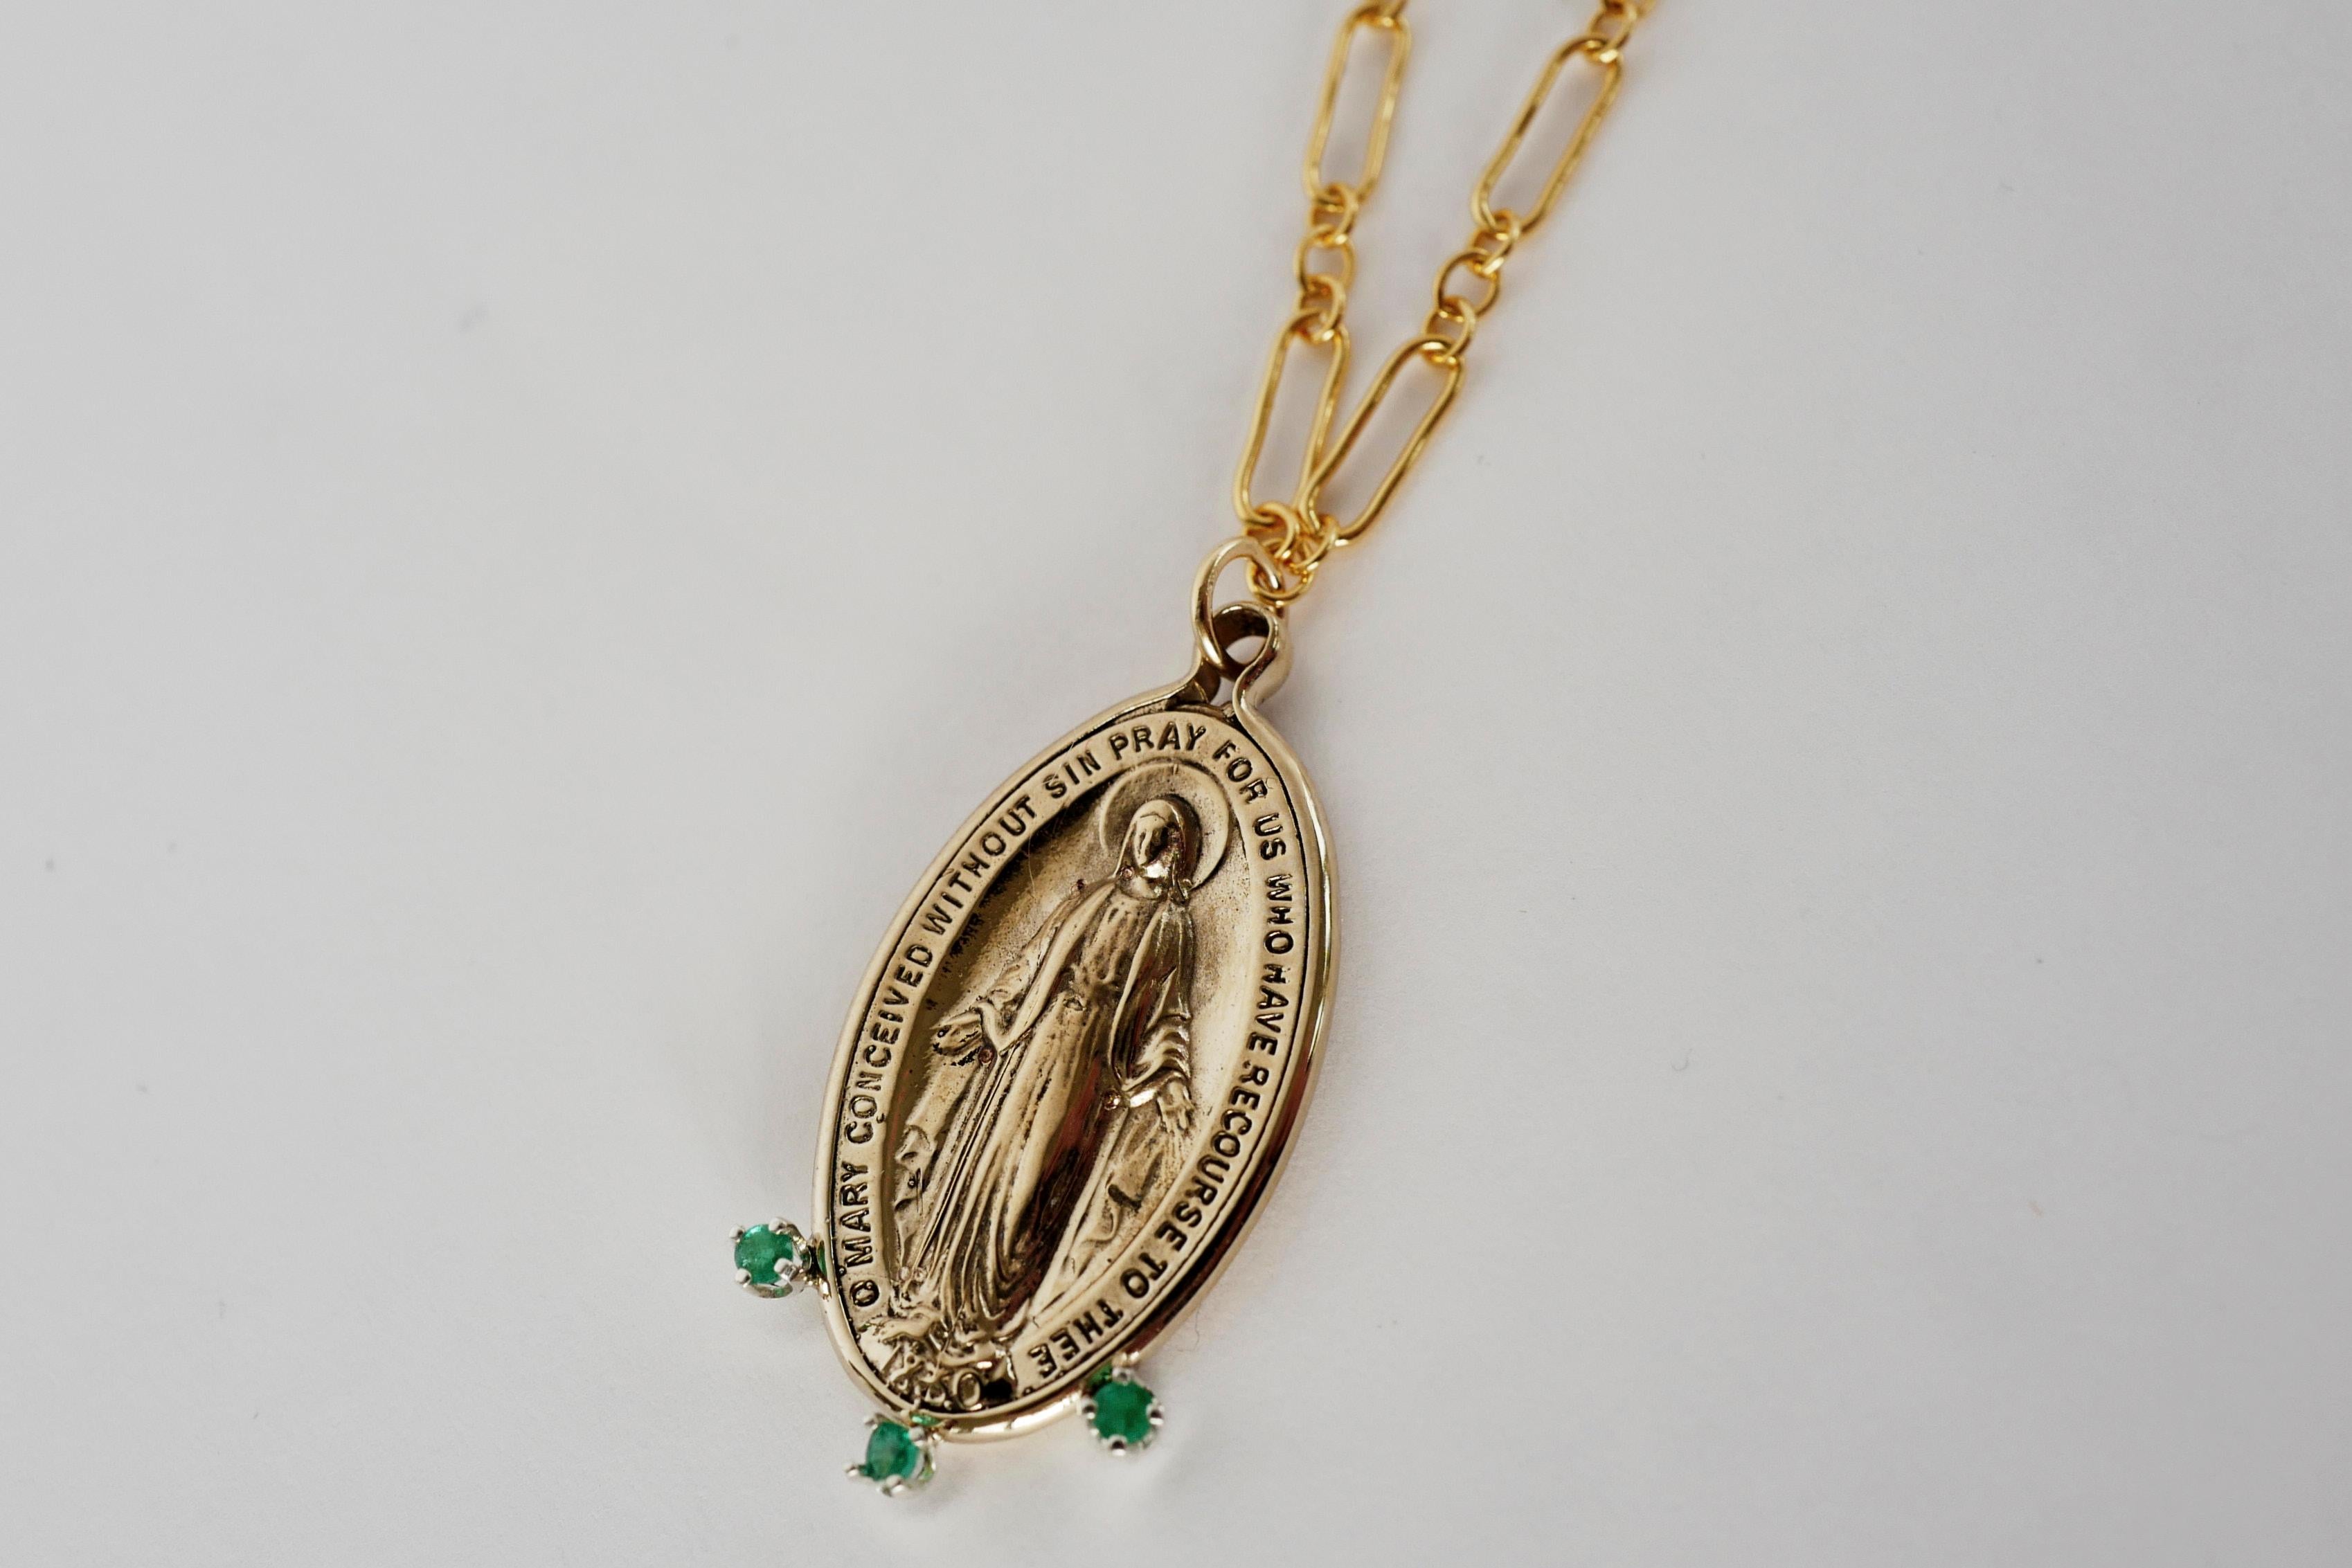 Emerald Virgin Mary Medal Chunky Chain Necklace Bronze Gold Filled J Dauphin In New Condition For Sale In Los Angeles, CA